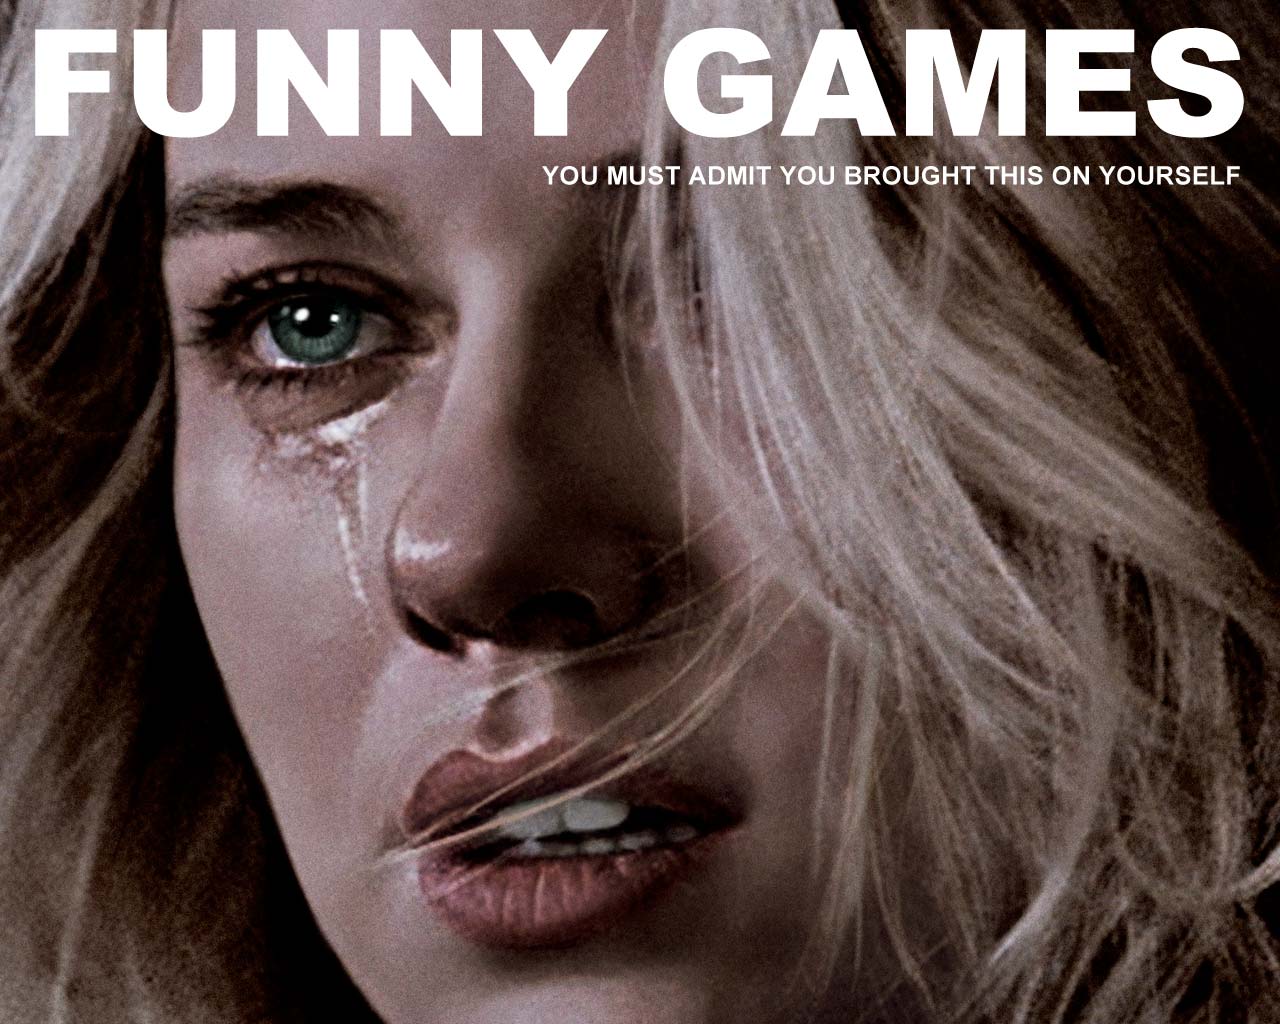 This is a poster for the movie Funny Games.